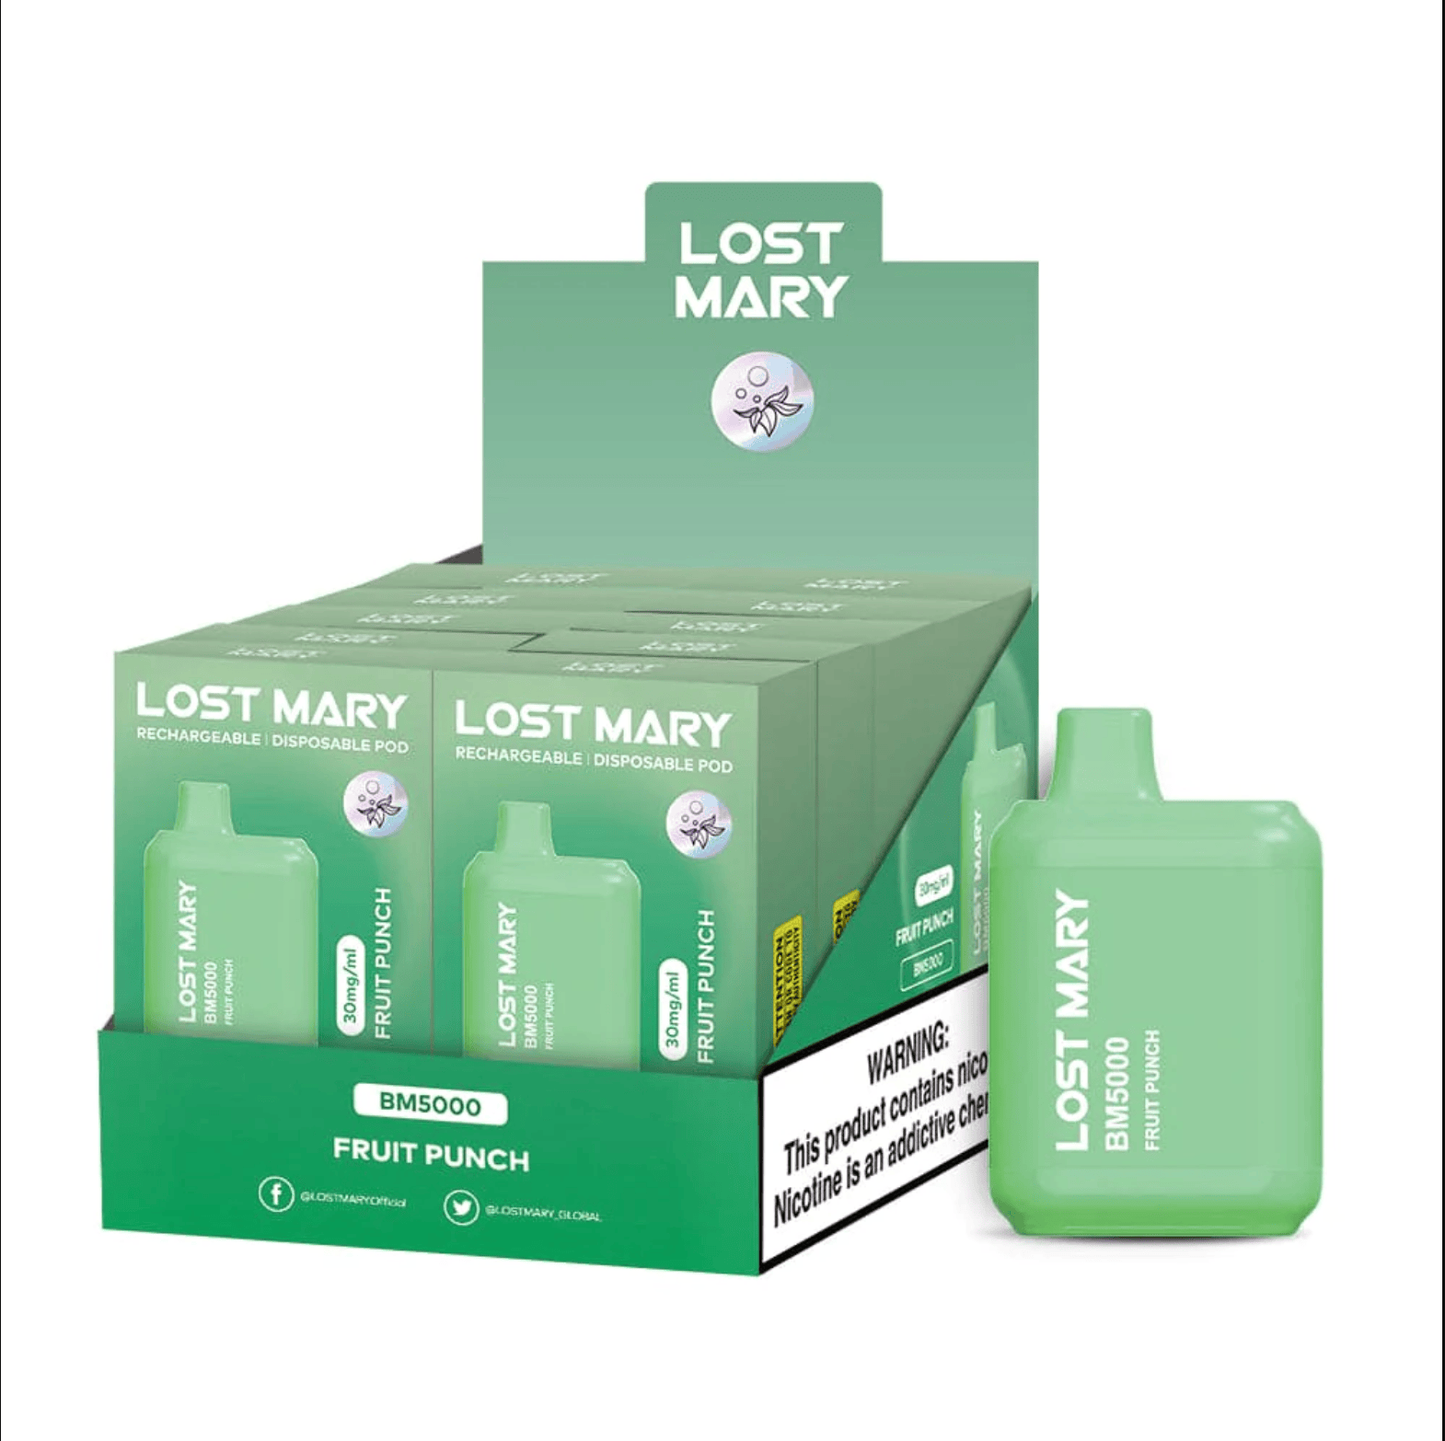 Lost Mary BM5000 Fruit Punch flavored disposable vape device and box.